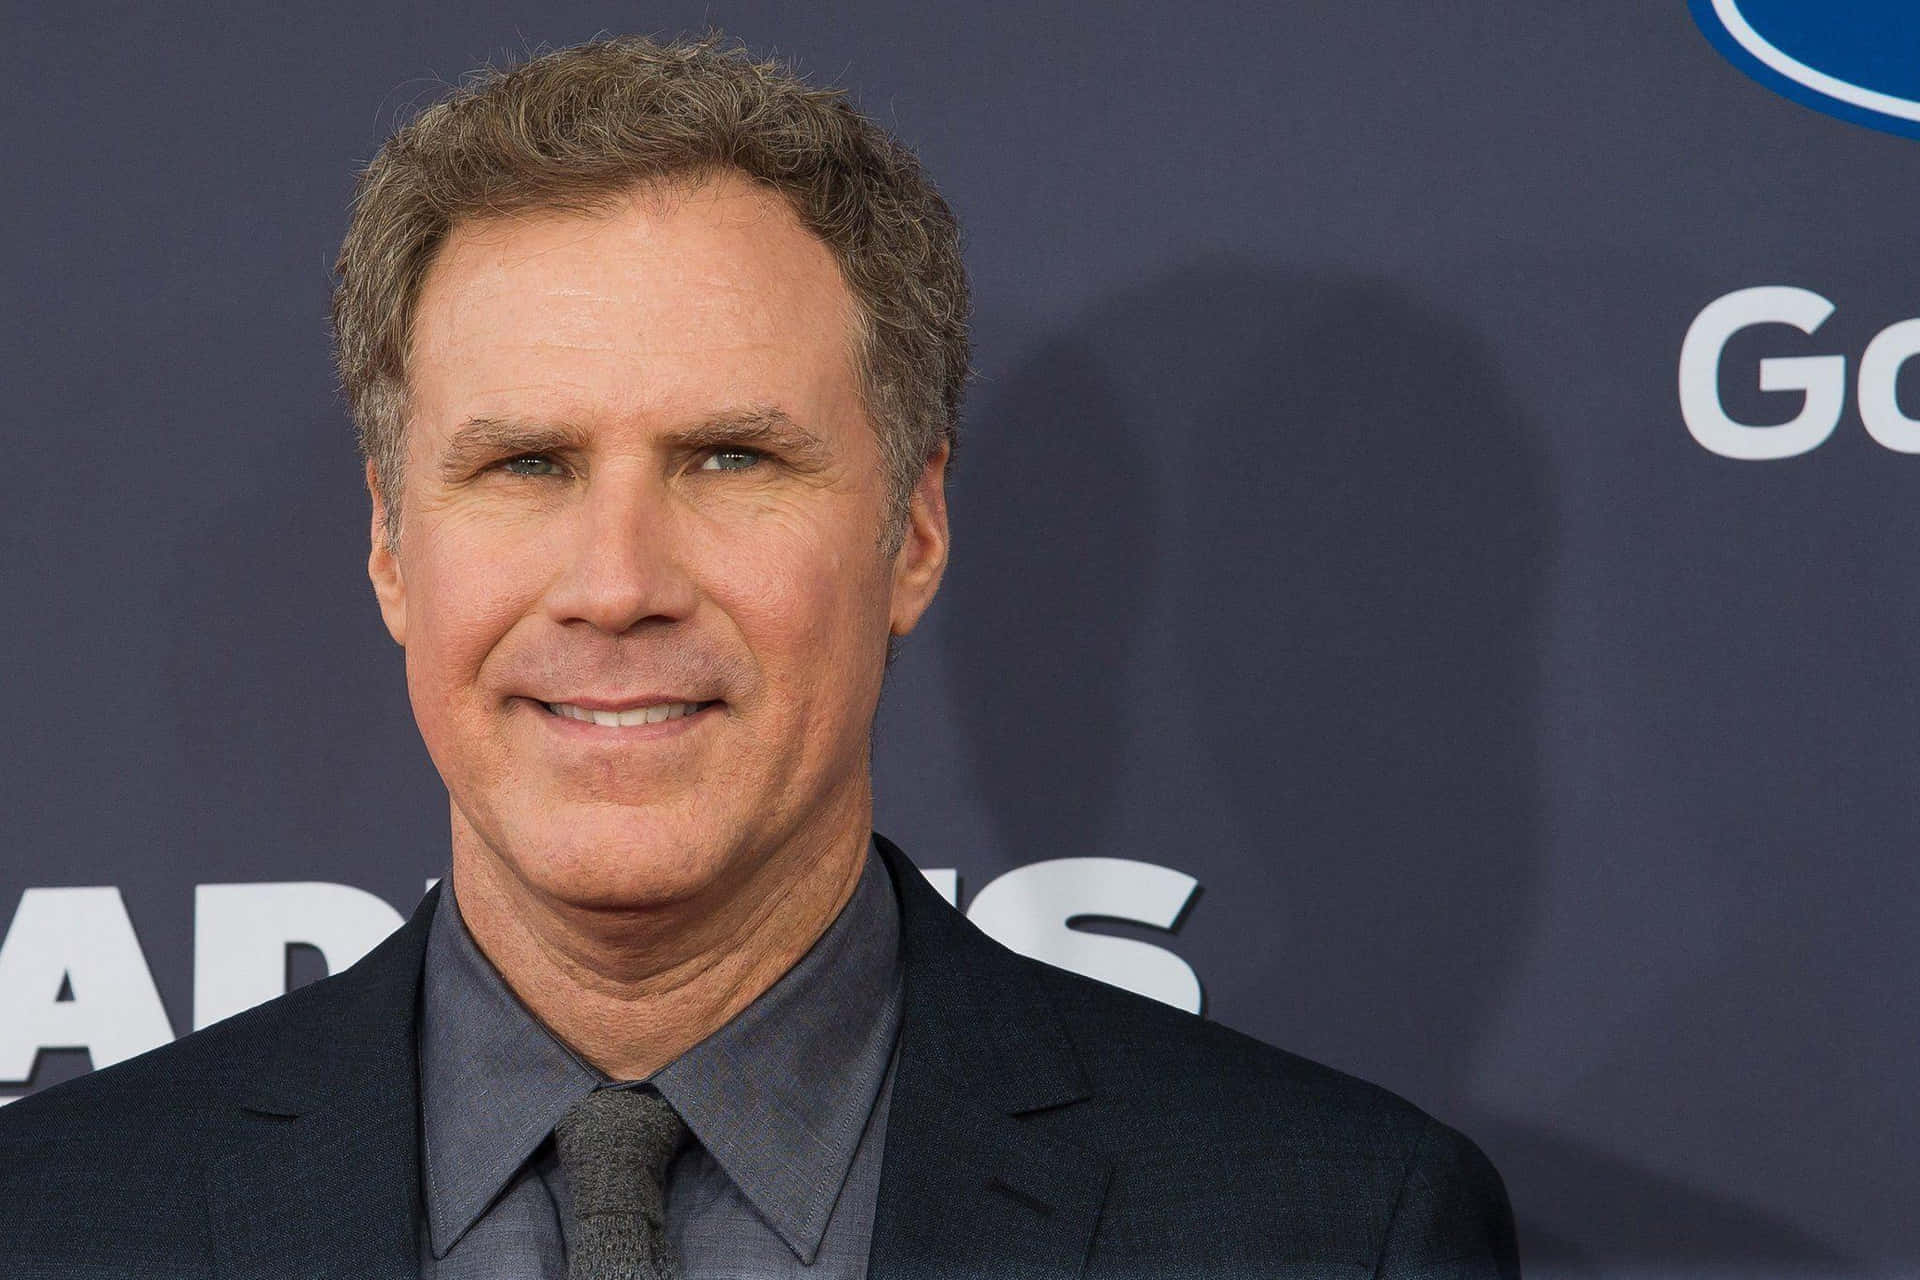 Will Ferrell striking a funny pose while holding a basketball in a promotional photo shoot. Wallpaper